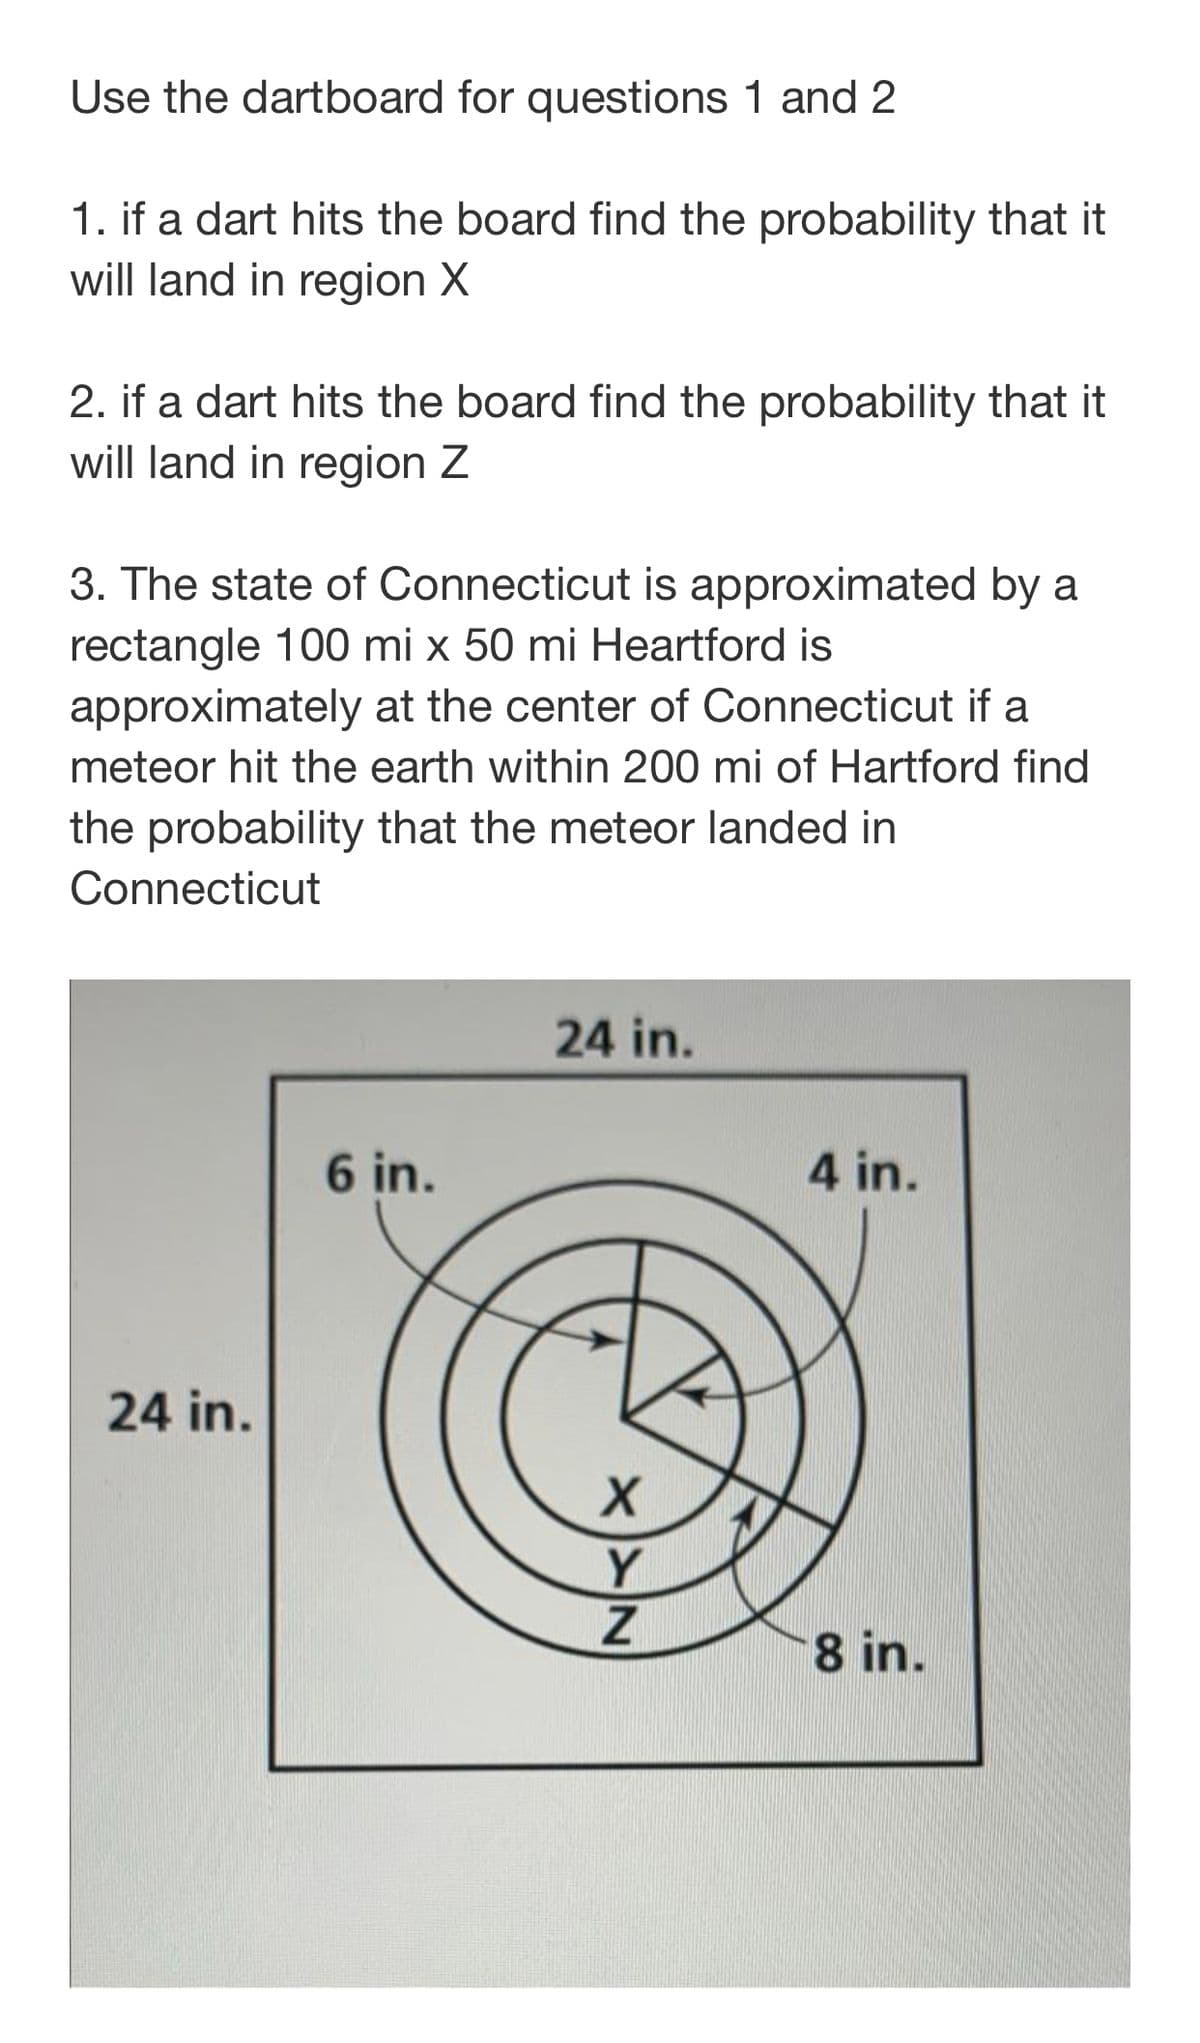 Use the dartboard for questions 1 and 2
1. if a dart hits the board find the probability that it
will land in region X
2. if a dart hits the board find the probability that it
will land in region Z
3. The state of Connecticut is approximated by a
rectangle 100 mi x 50 mi Heartford is
approximately at the center of Connecticut if a
meteor hit the earth within 200 mi of Hartford find
the probability that the meteor landed in
Connecticut
24 in.
6 in.
4 in.
24 in.
Y
8 in.
